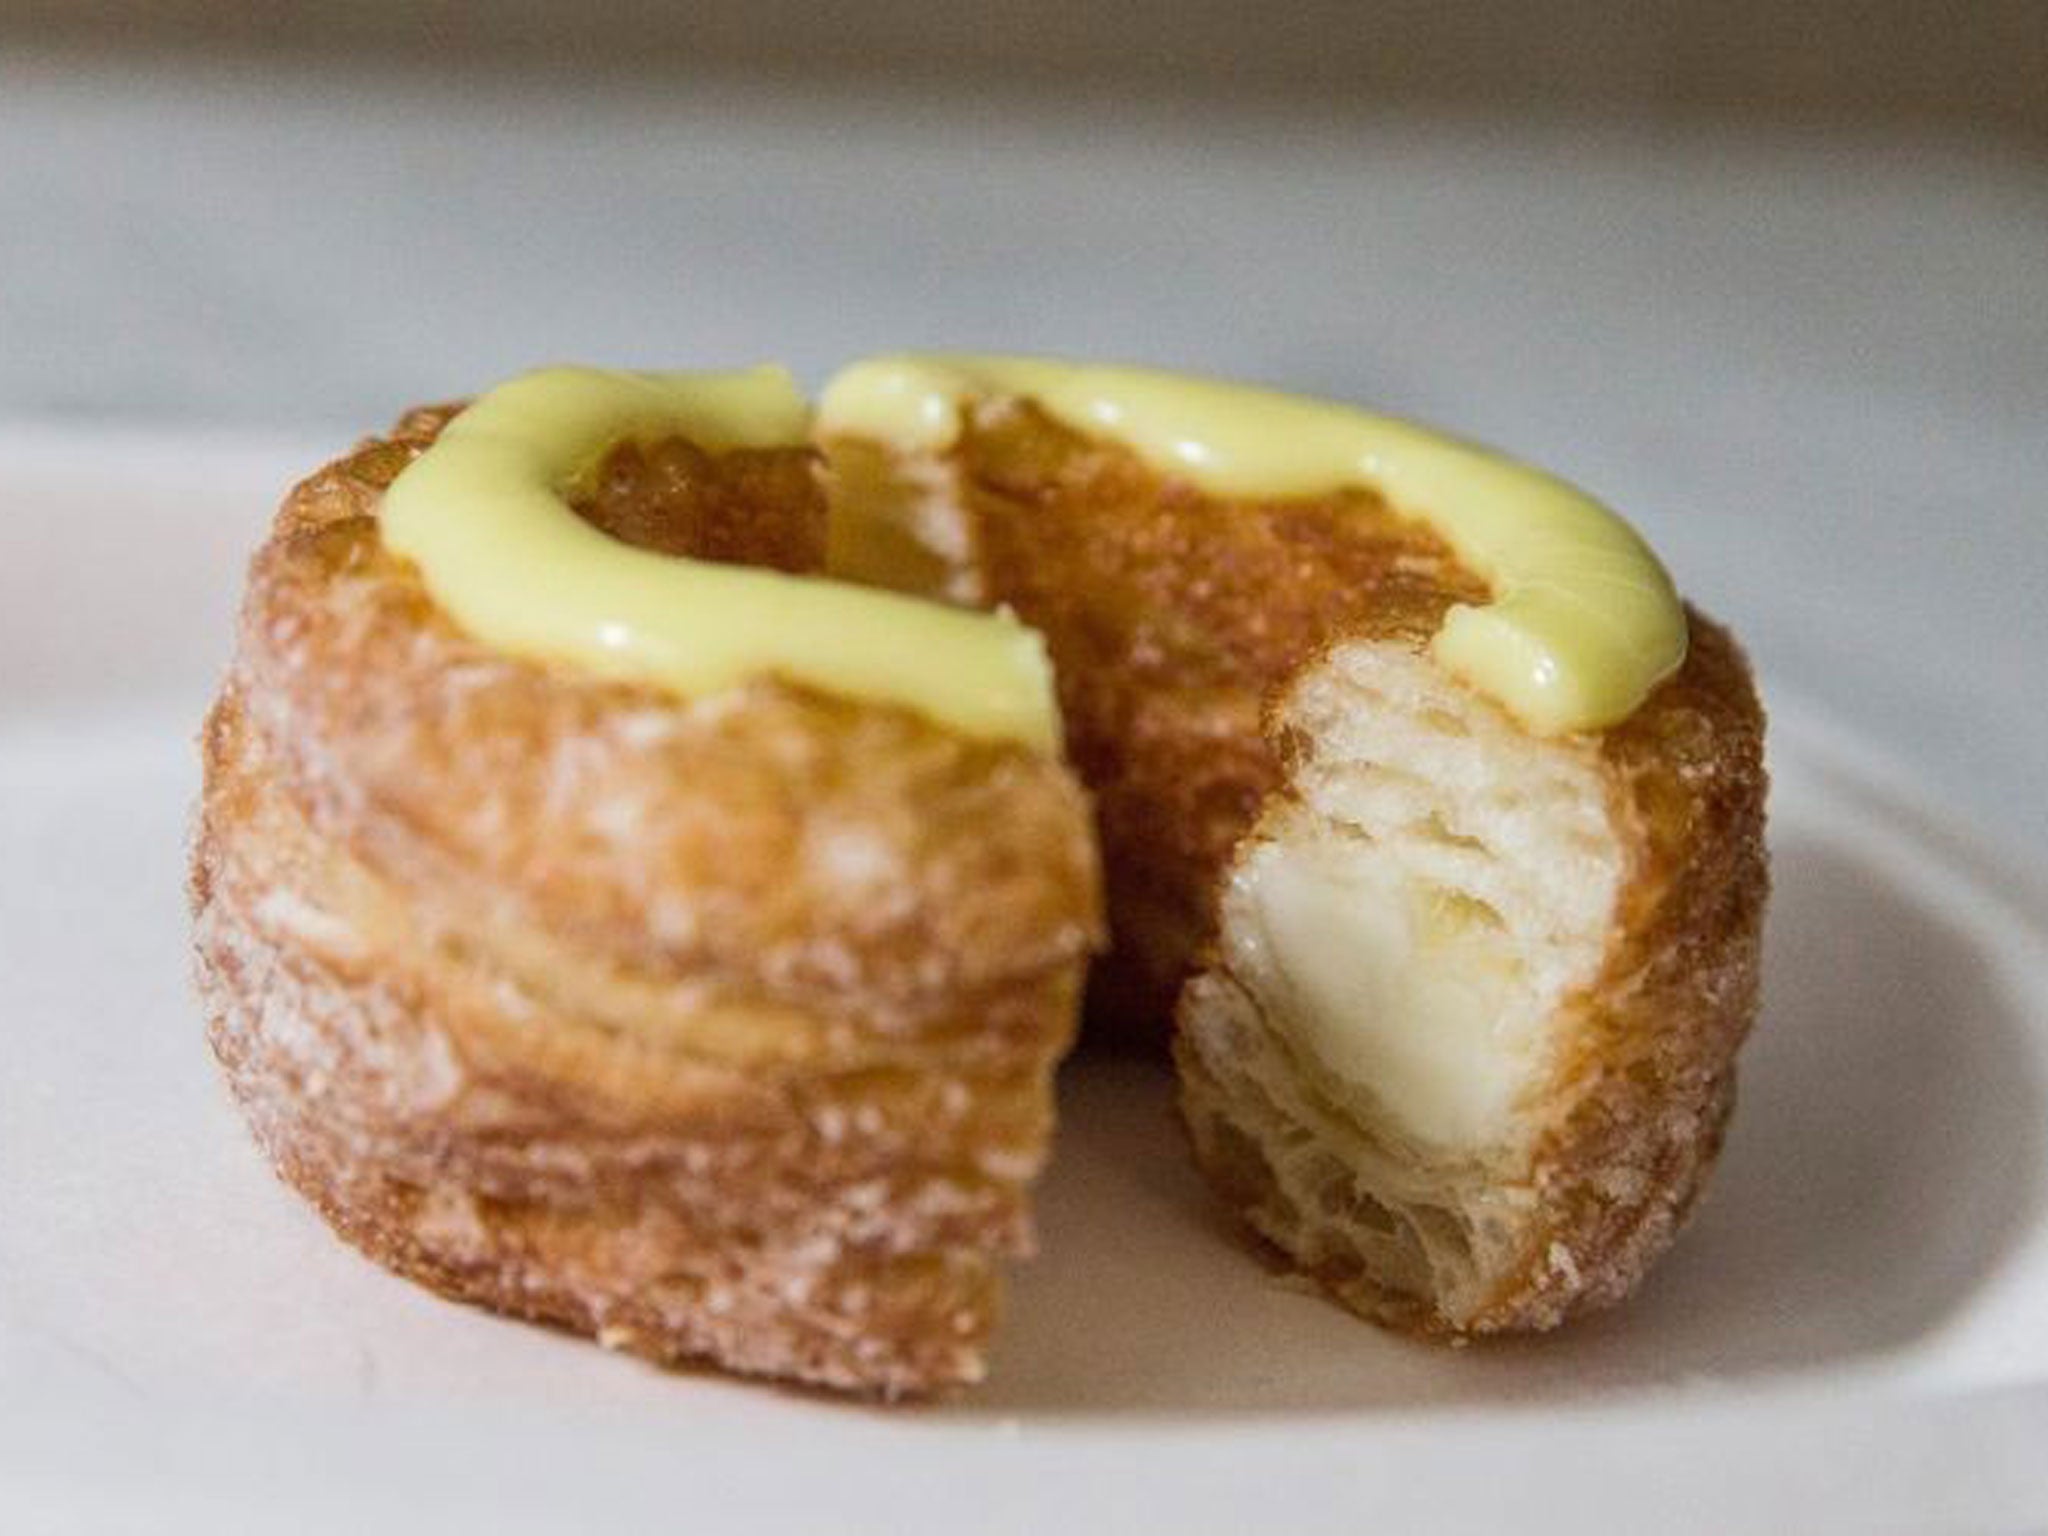 The croissant-doughnut hybrid is hugely popular in the United States